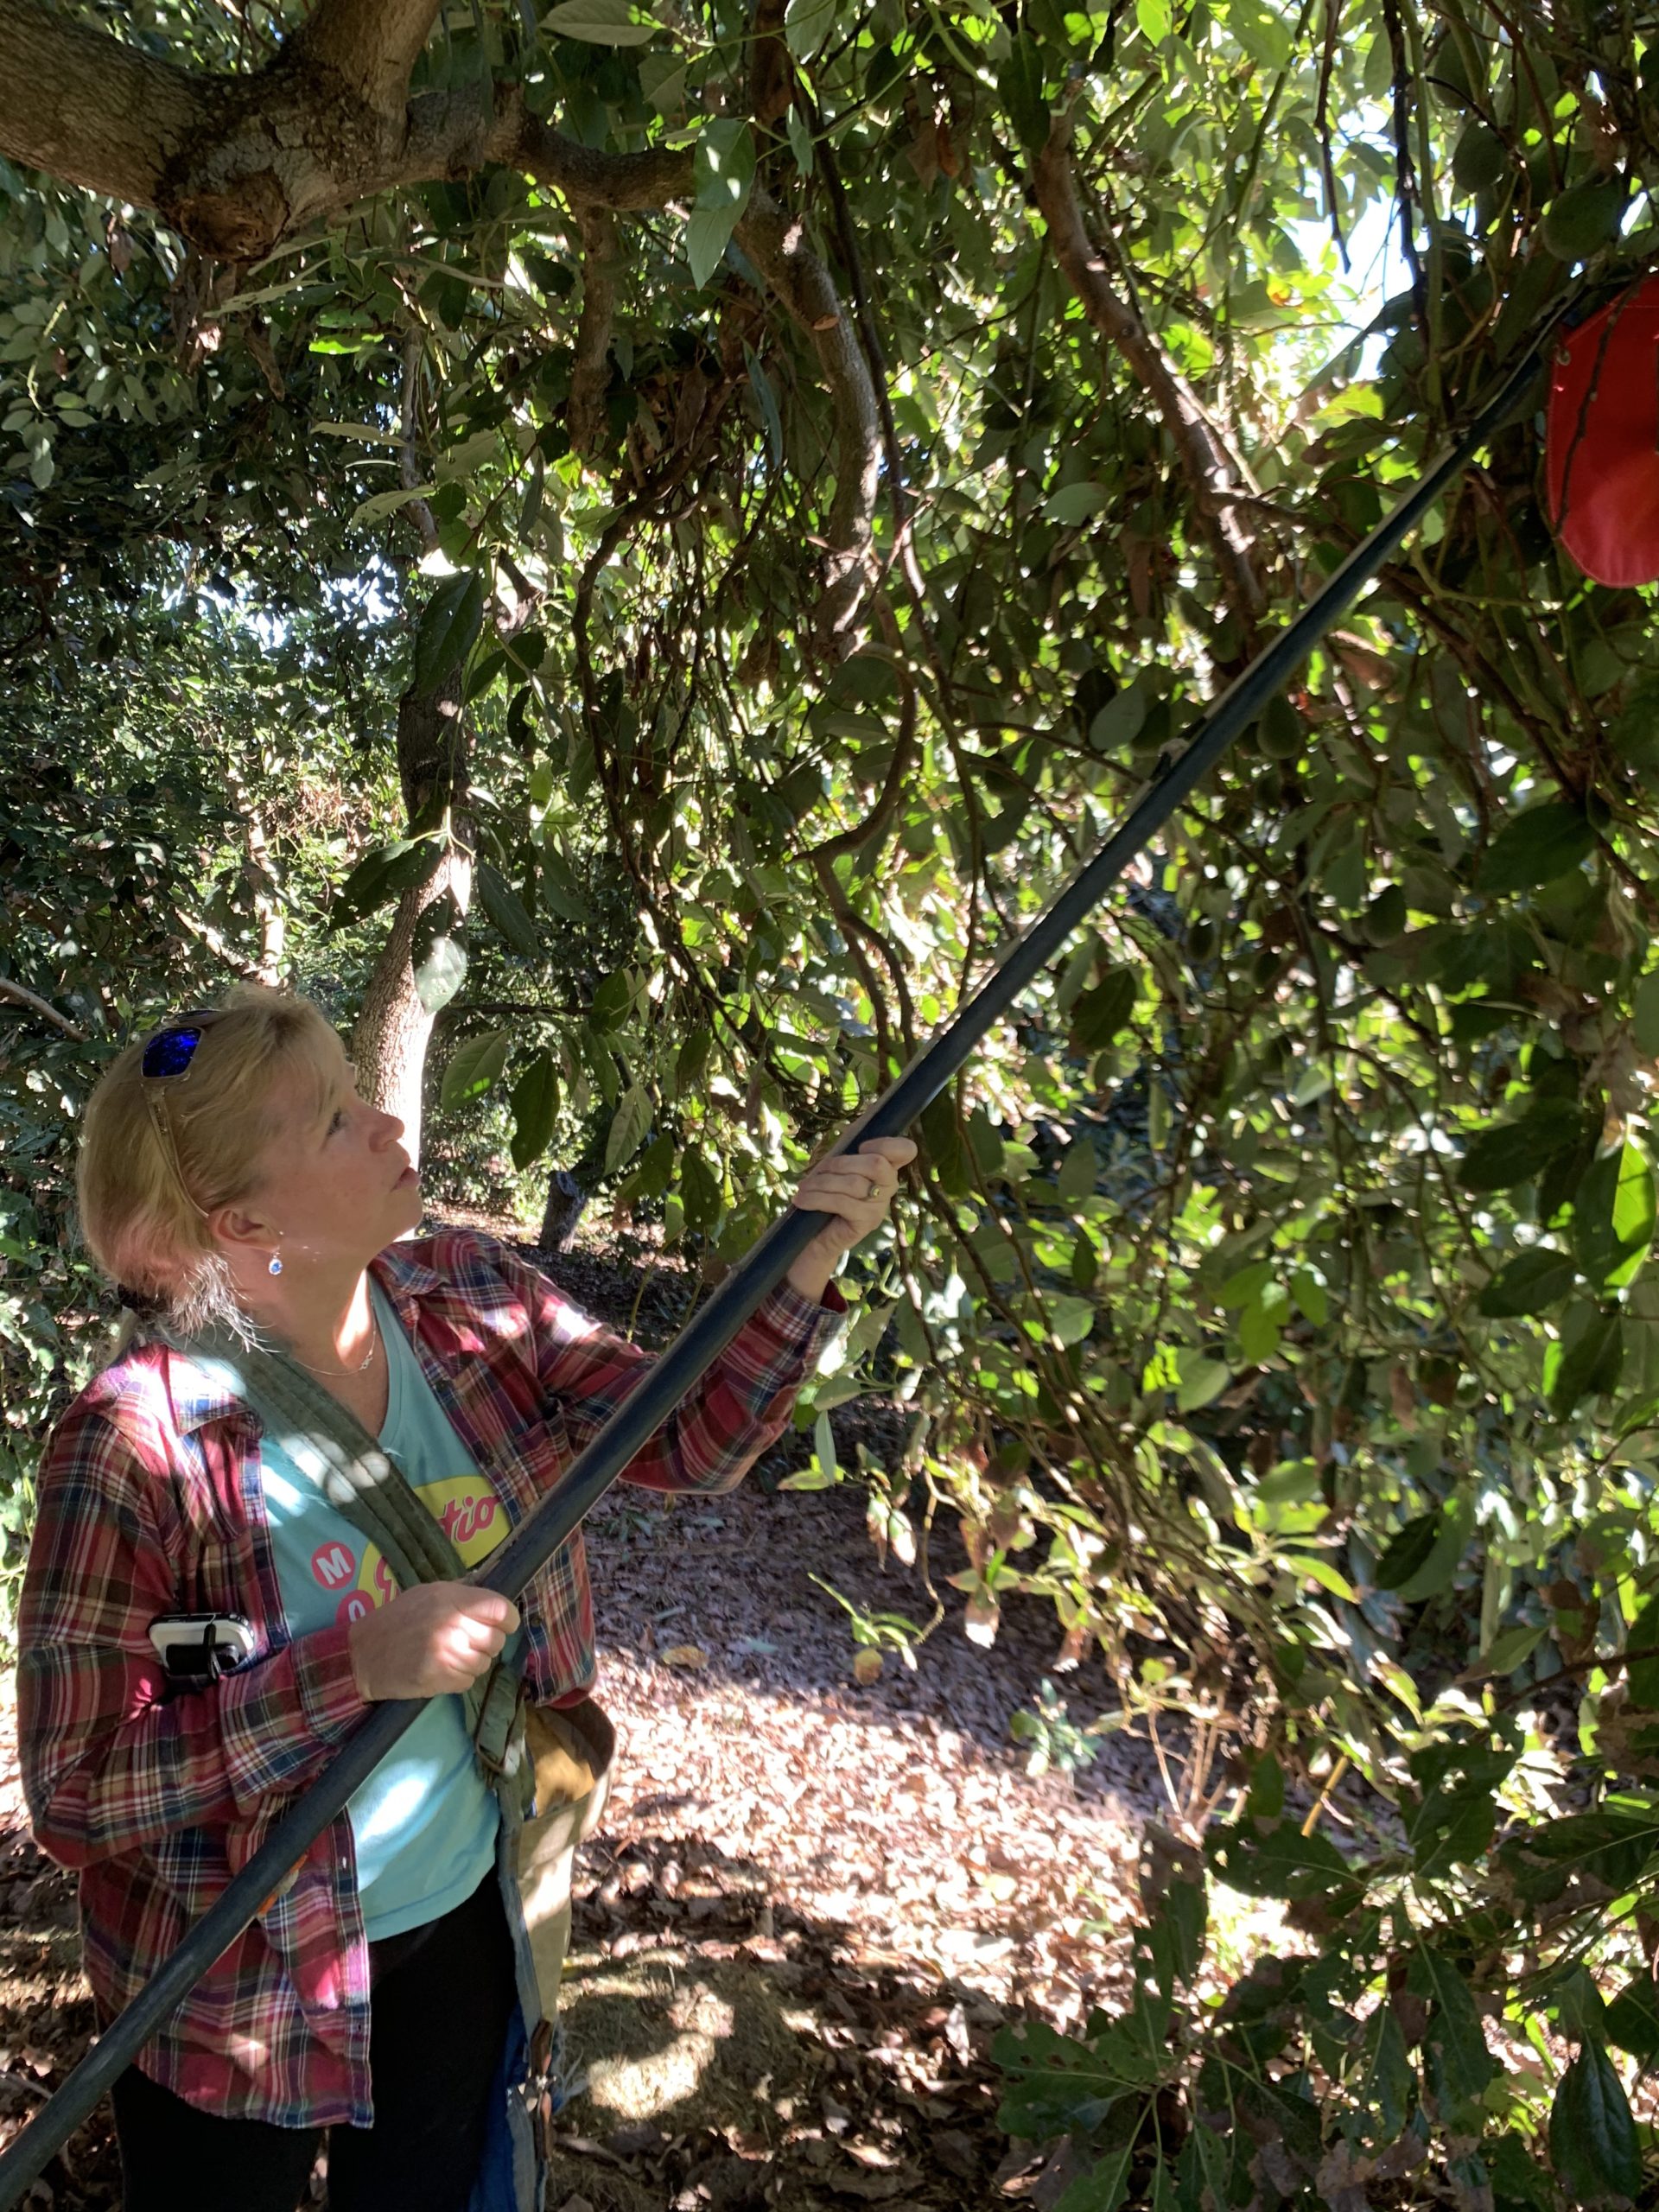 using a picking pole to harvest fruit high in the tree